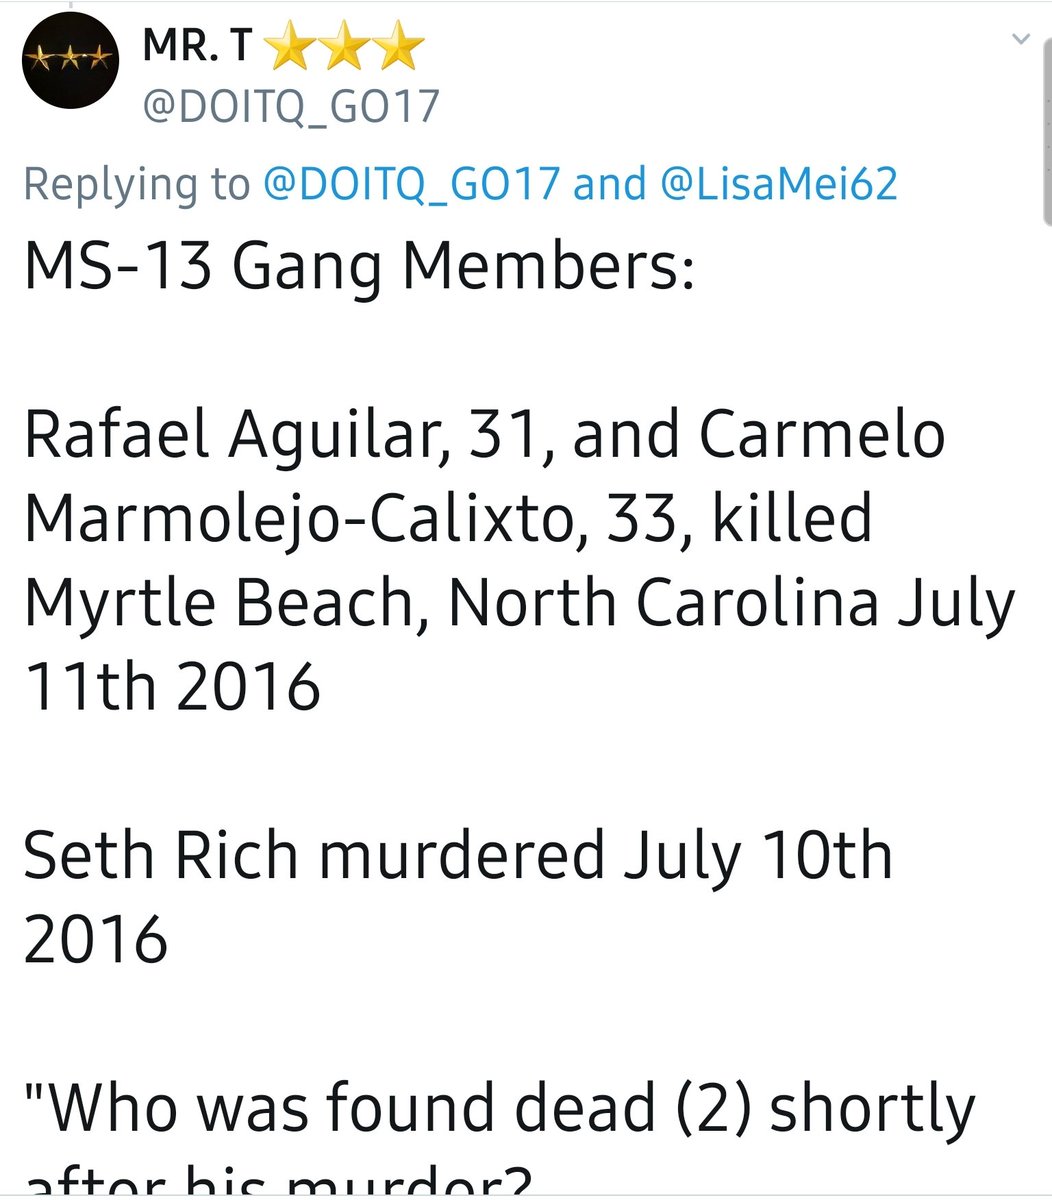 9)This isn't a new theory, there are many instances of people claiming and discussing the murders and possible link to Seth Rich @DOITQ_GO17